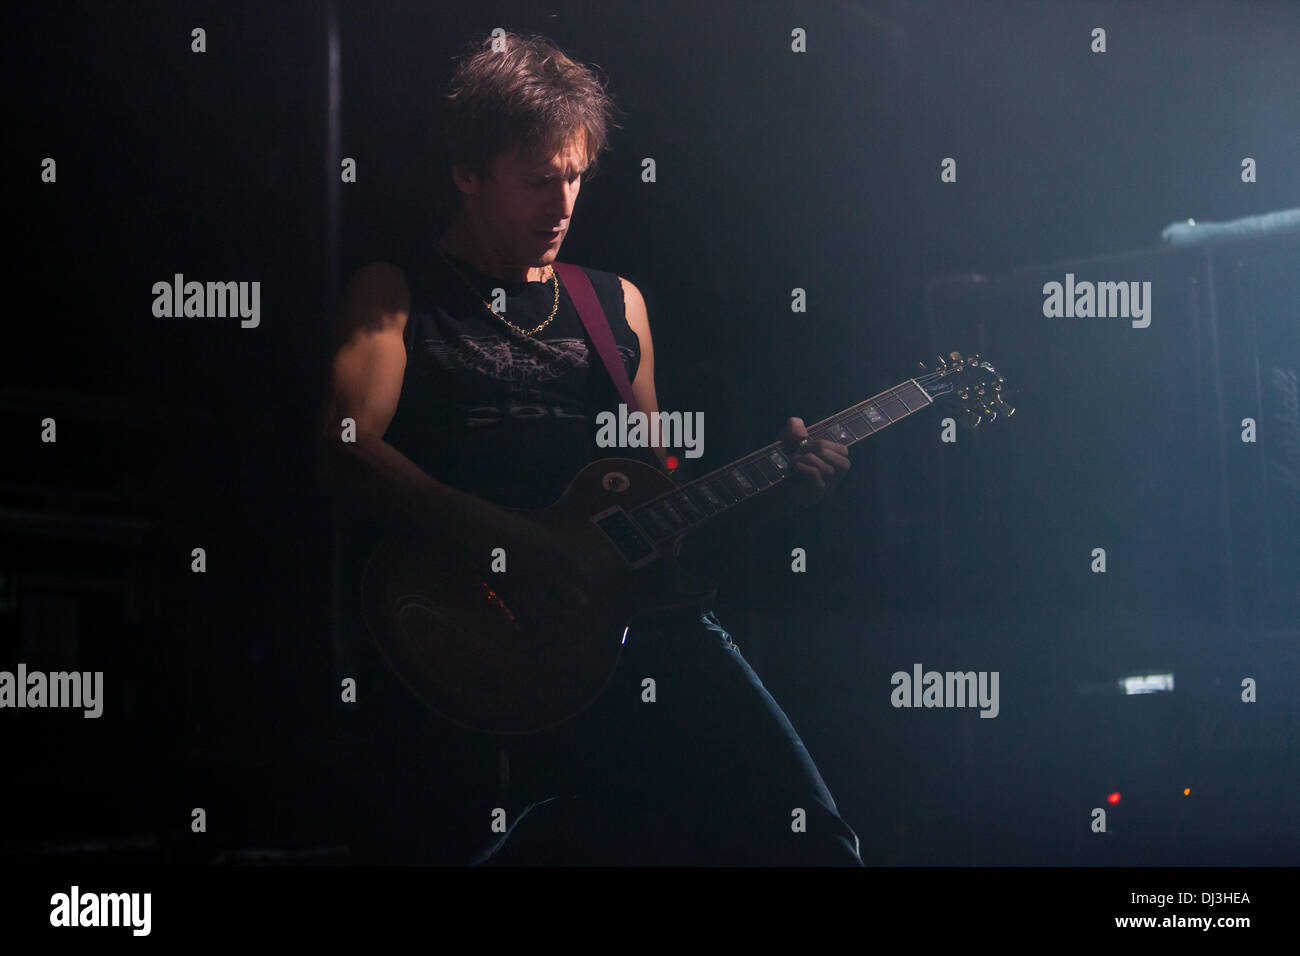 London, UK. 20th November 2013. Kenwyn House, Reef guitarist performing at one-off KOKO show as part of their 20th Anniversary Tour. London, UK 20th November 2013. Credit:  martyn wheatley/Alamy Live News Stock Photo